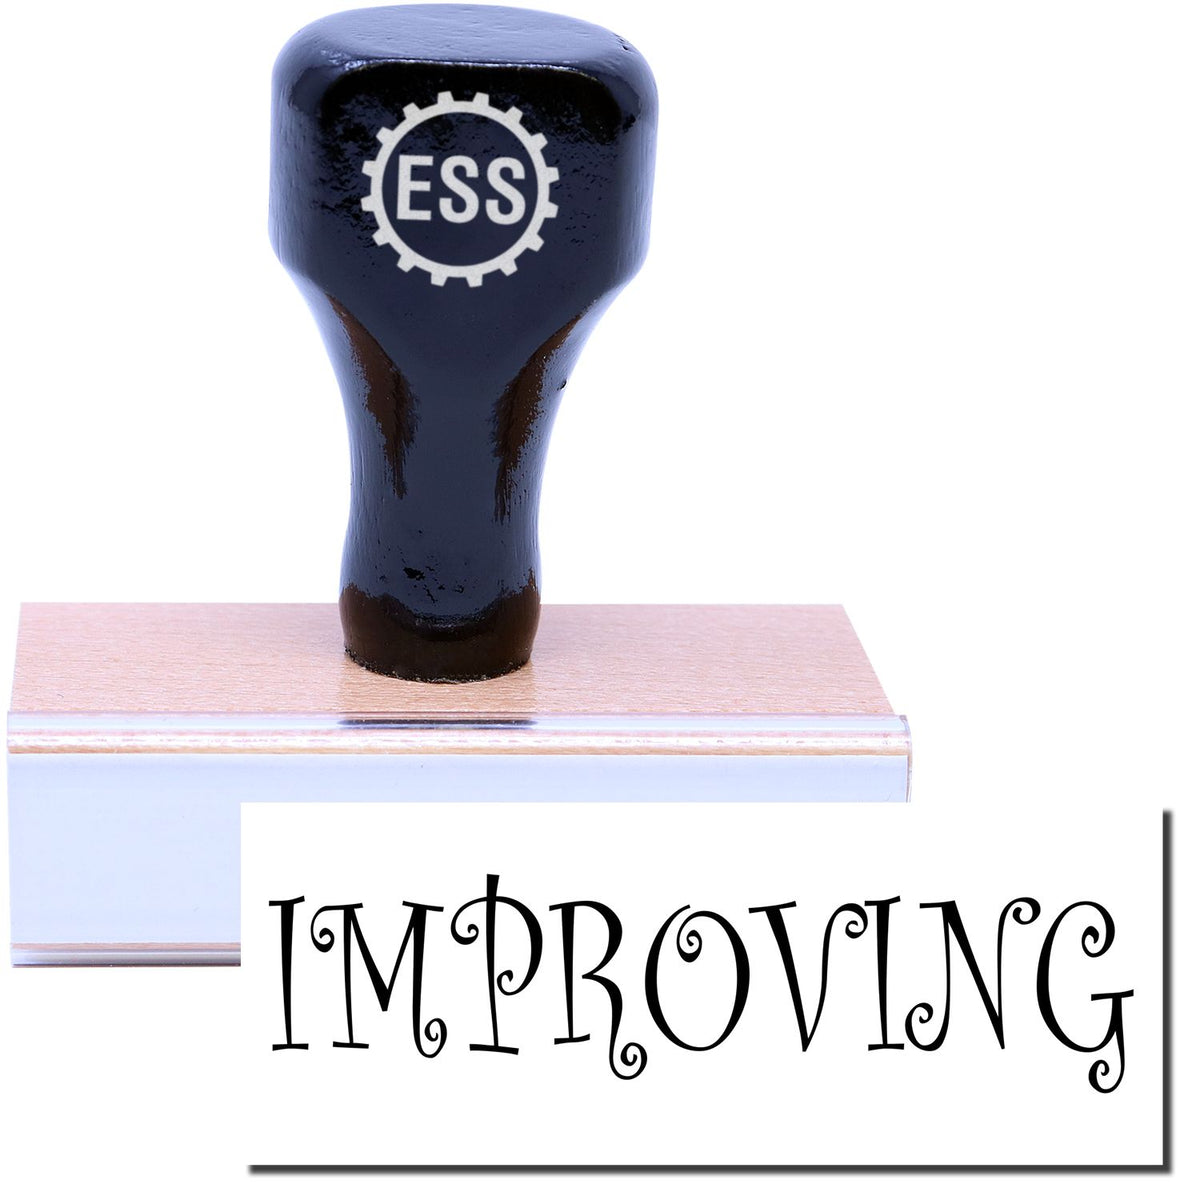 A stock office rubber stamp with a stamped image showing how the text &quot;IMPROVING&quot; is displayed after stamping.